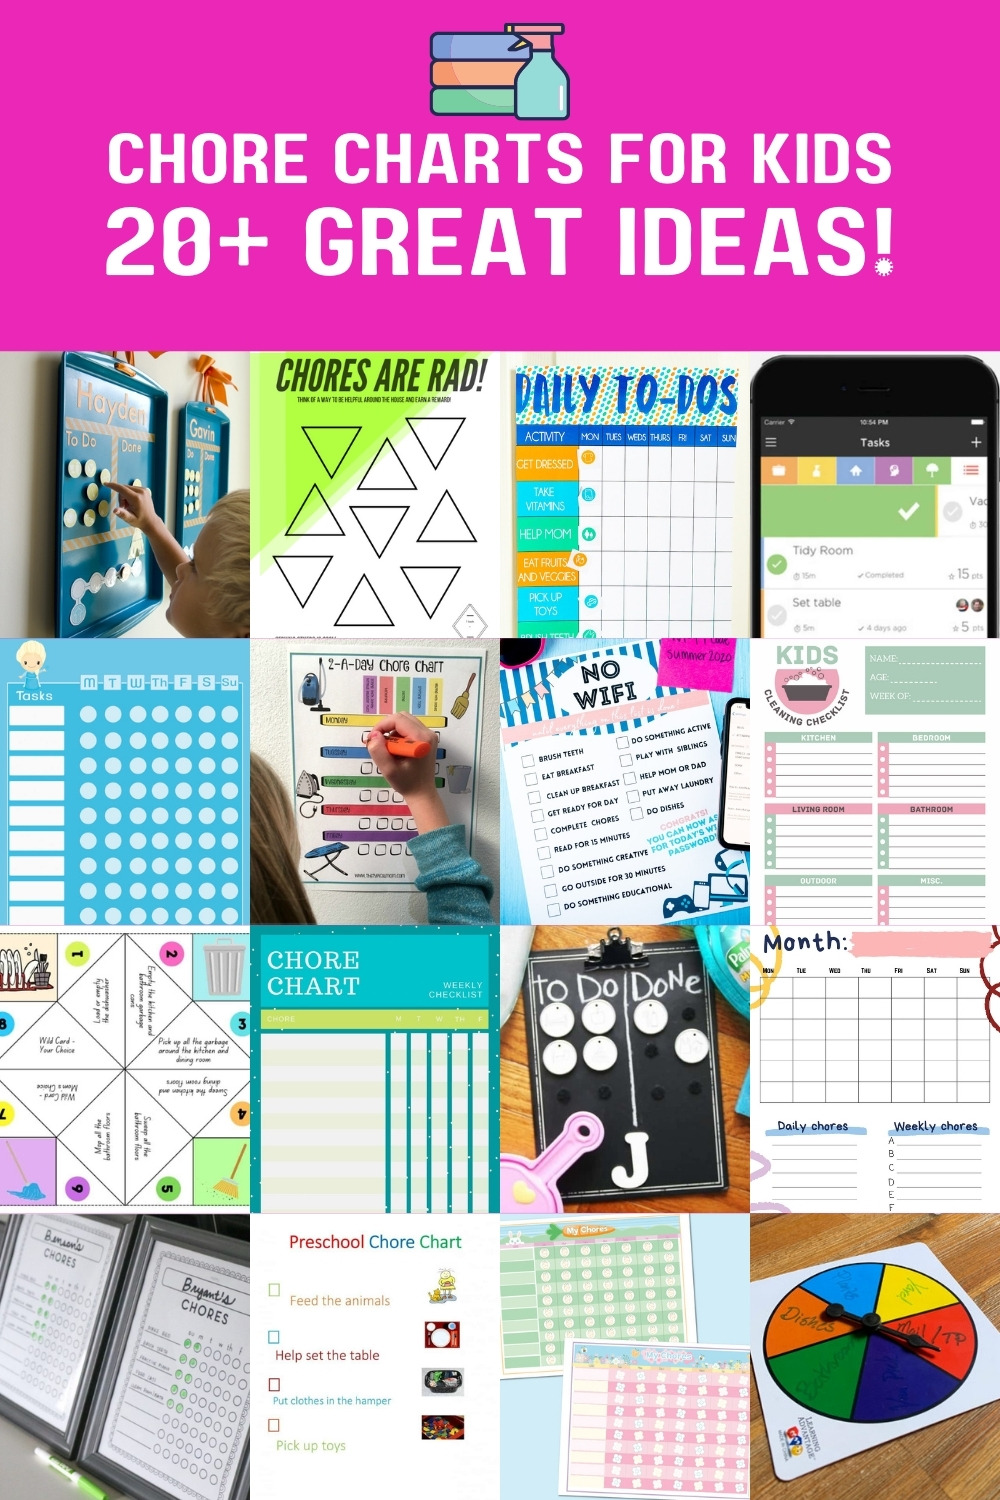 chore charts for kids - over 20 of the best ideas